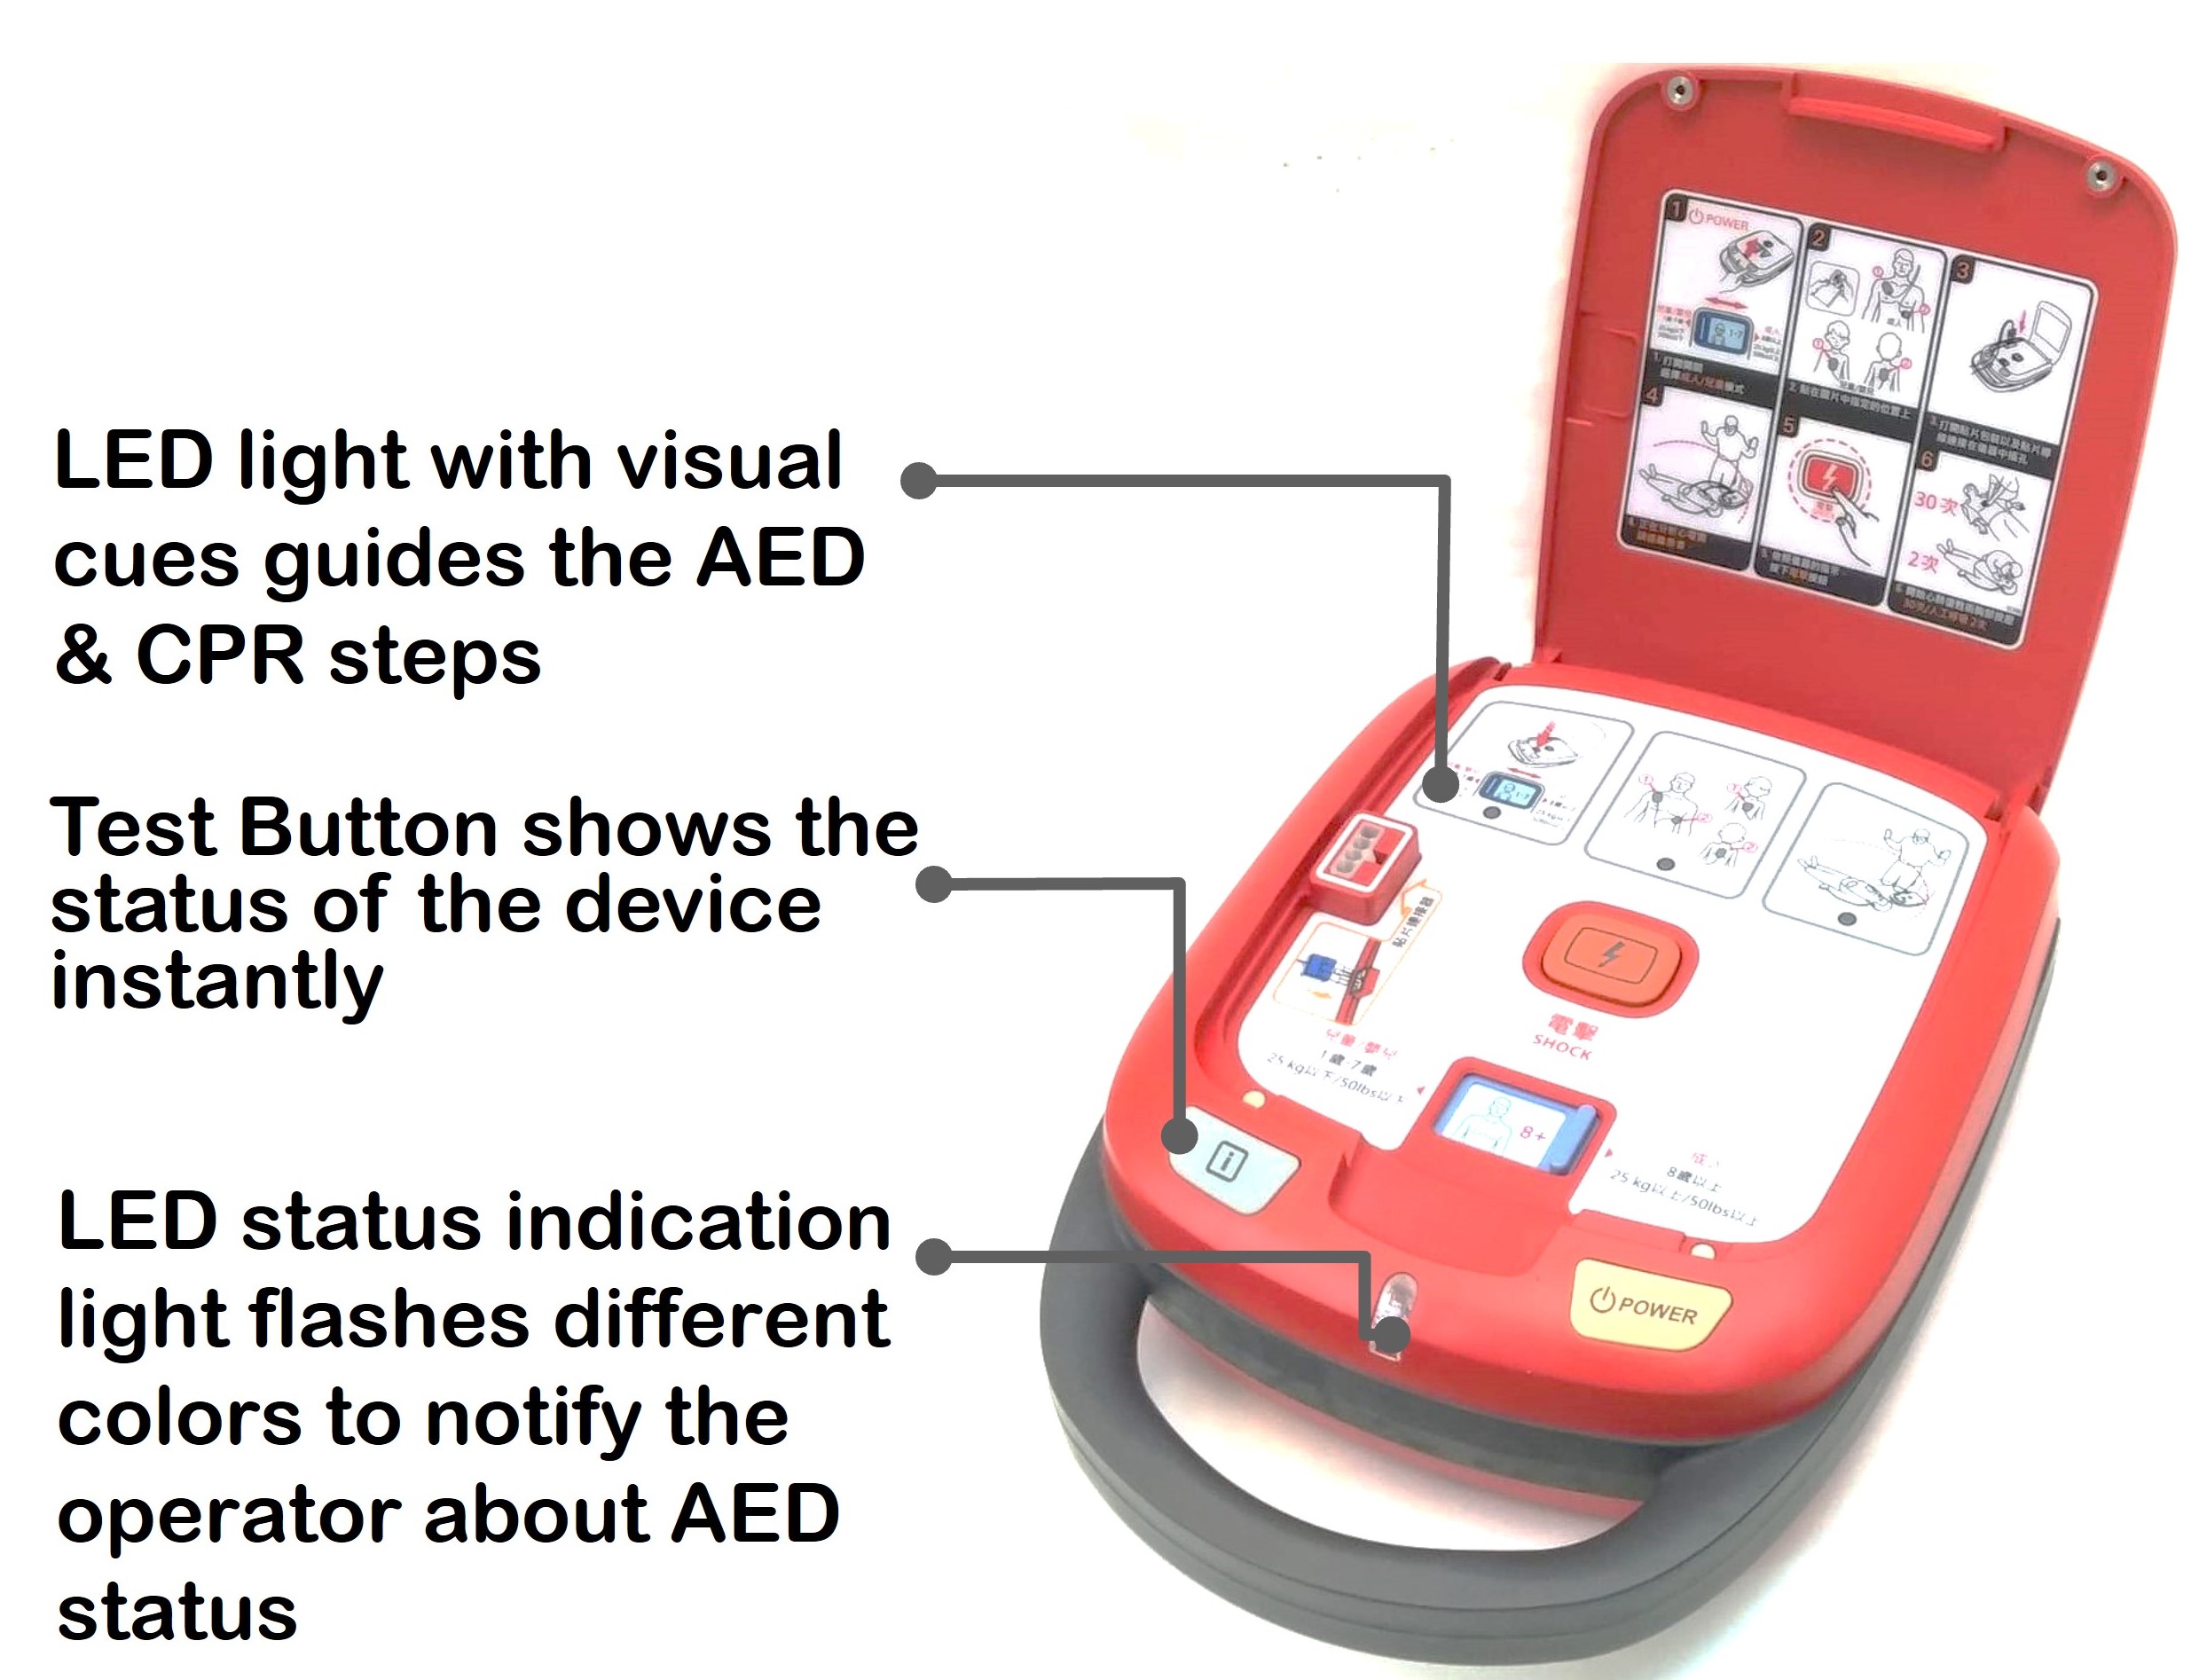 AED HR-501